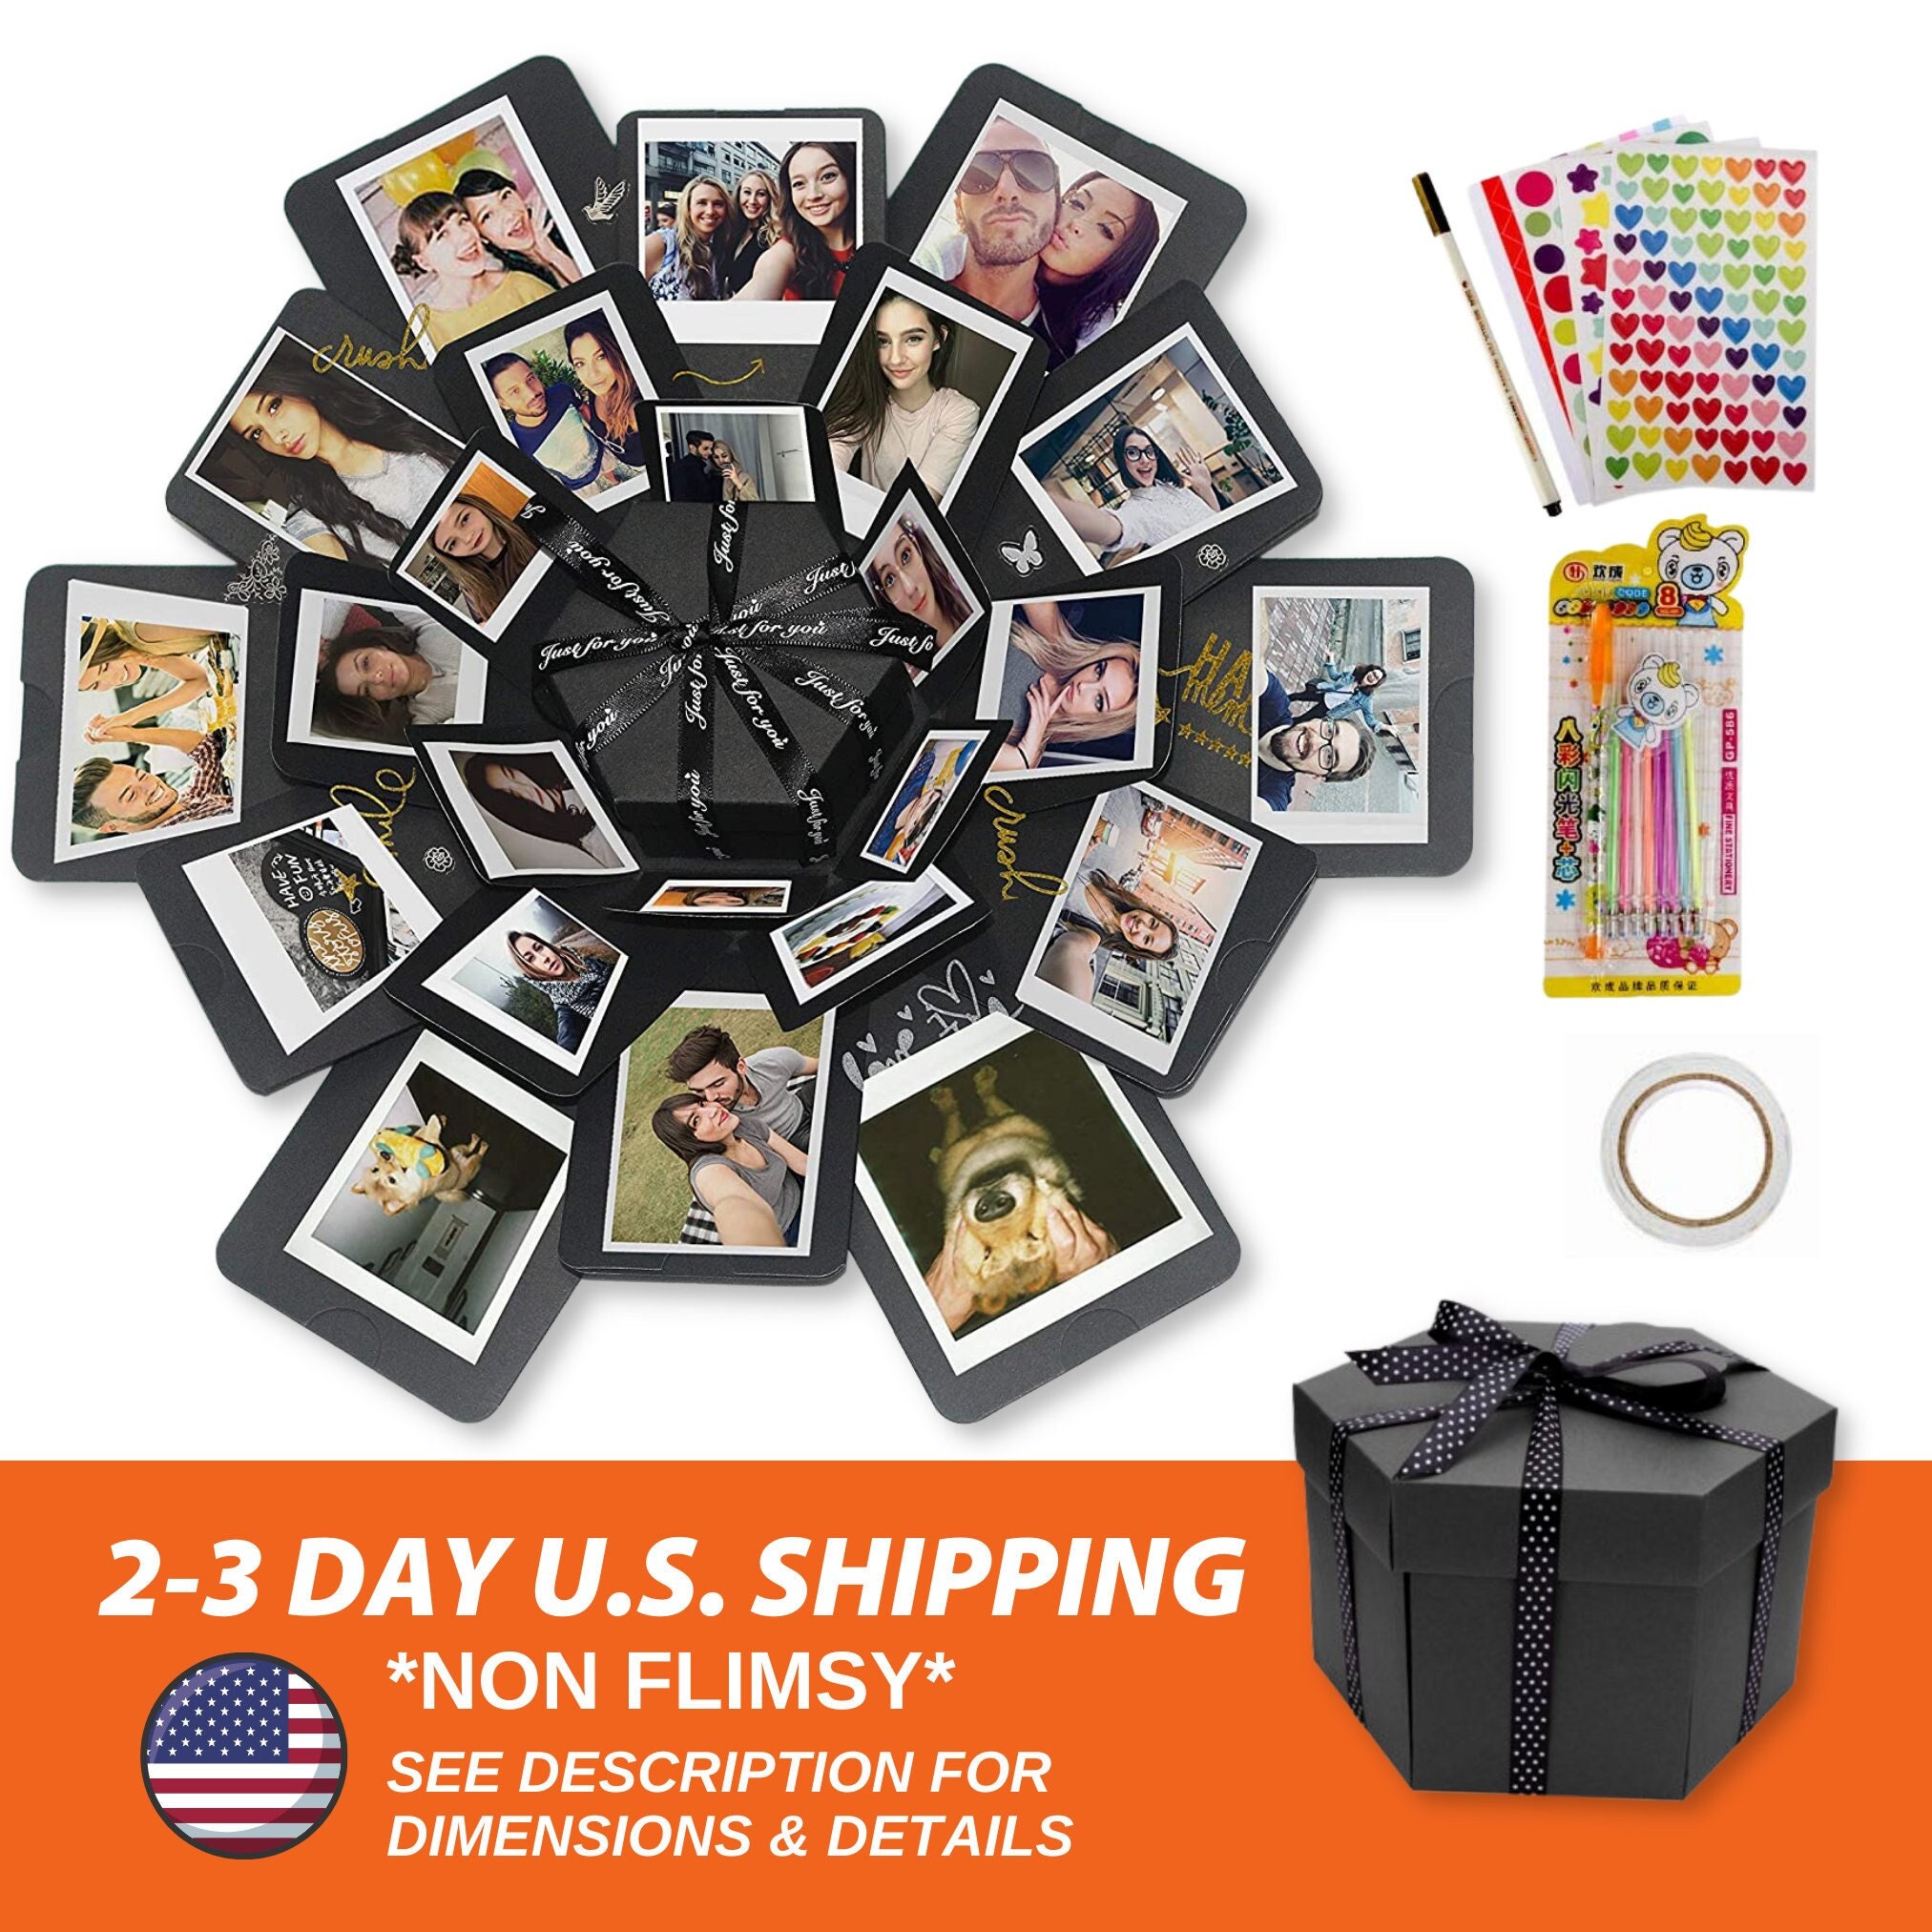 Photo Explosion Gift Box Kit Just Add Your Photos Perfect for